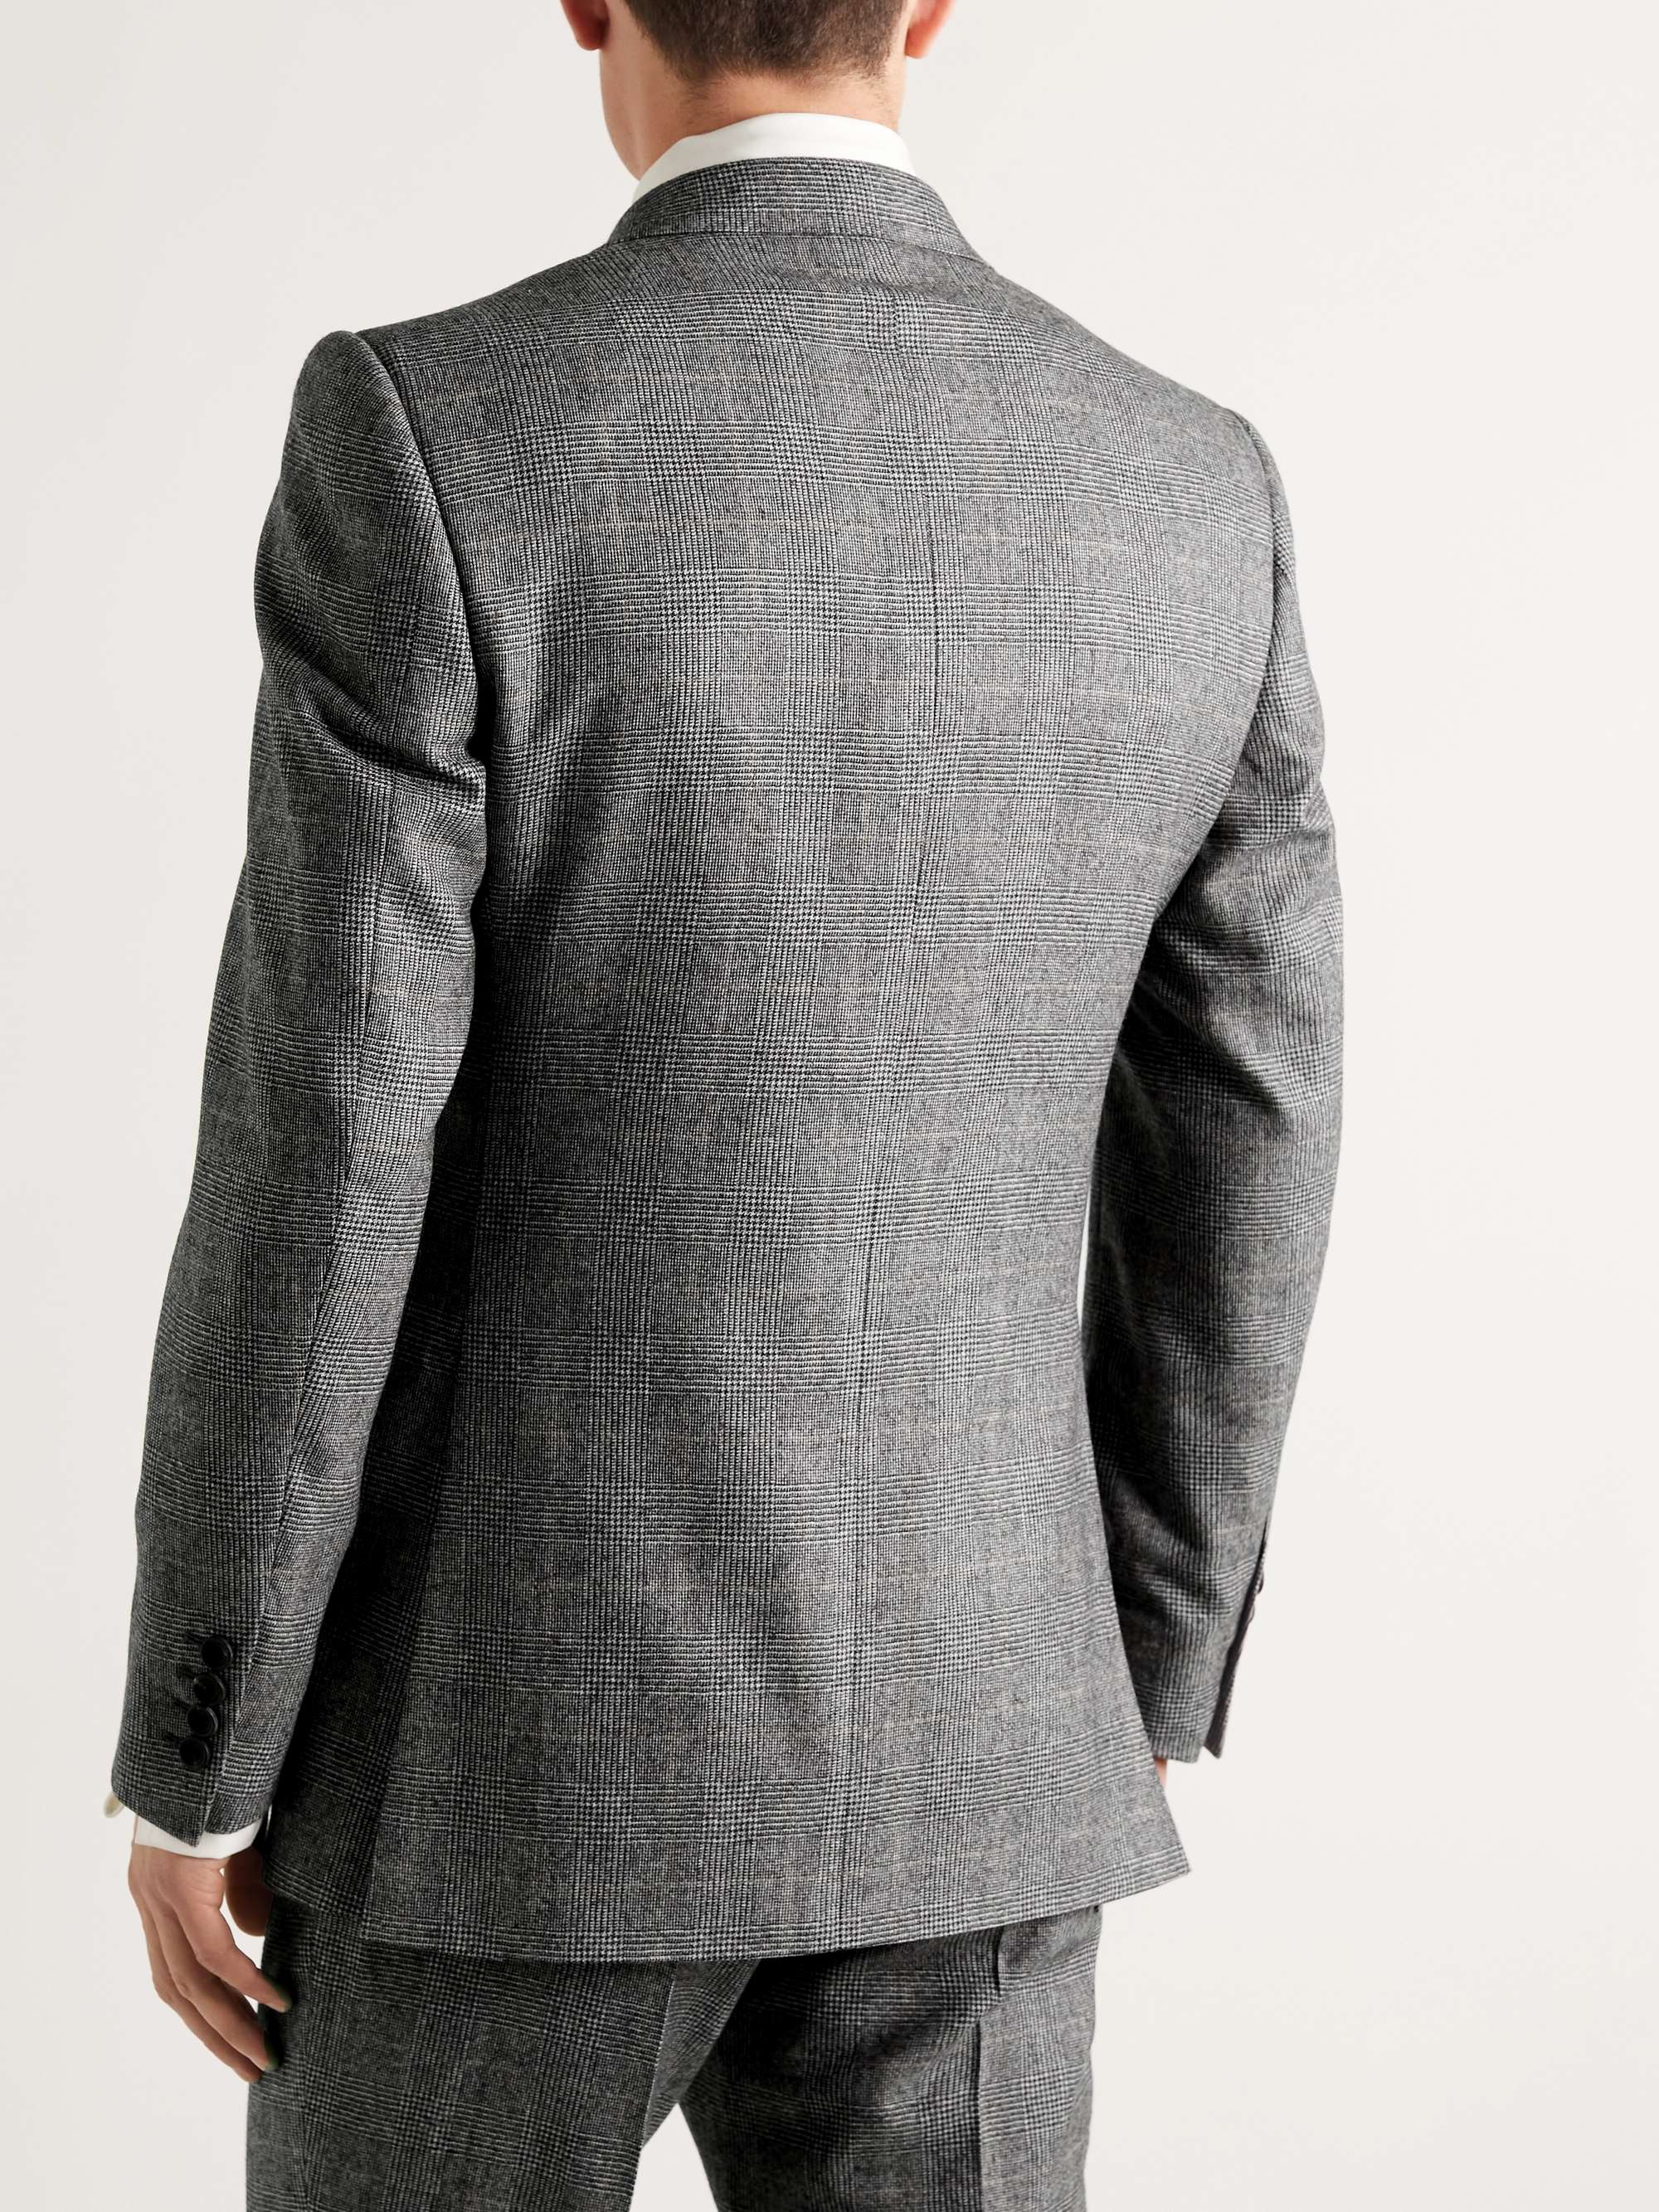 KINGSMAN Archie Slim-Fit Double-Breasted Prince of Wales Checked Wool Suit Jacket